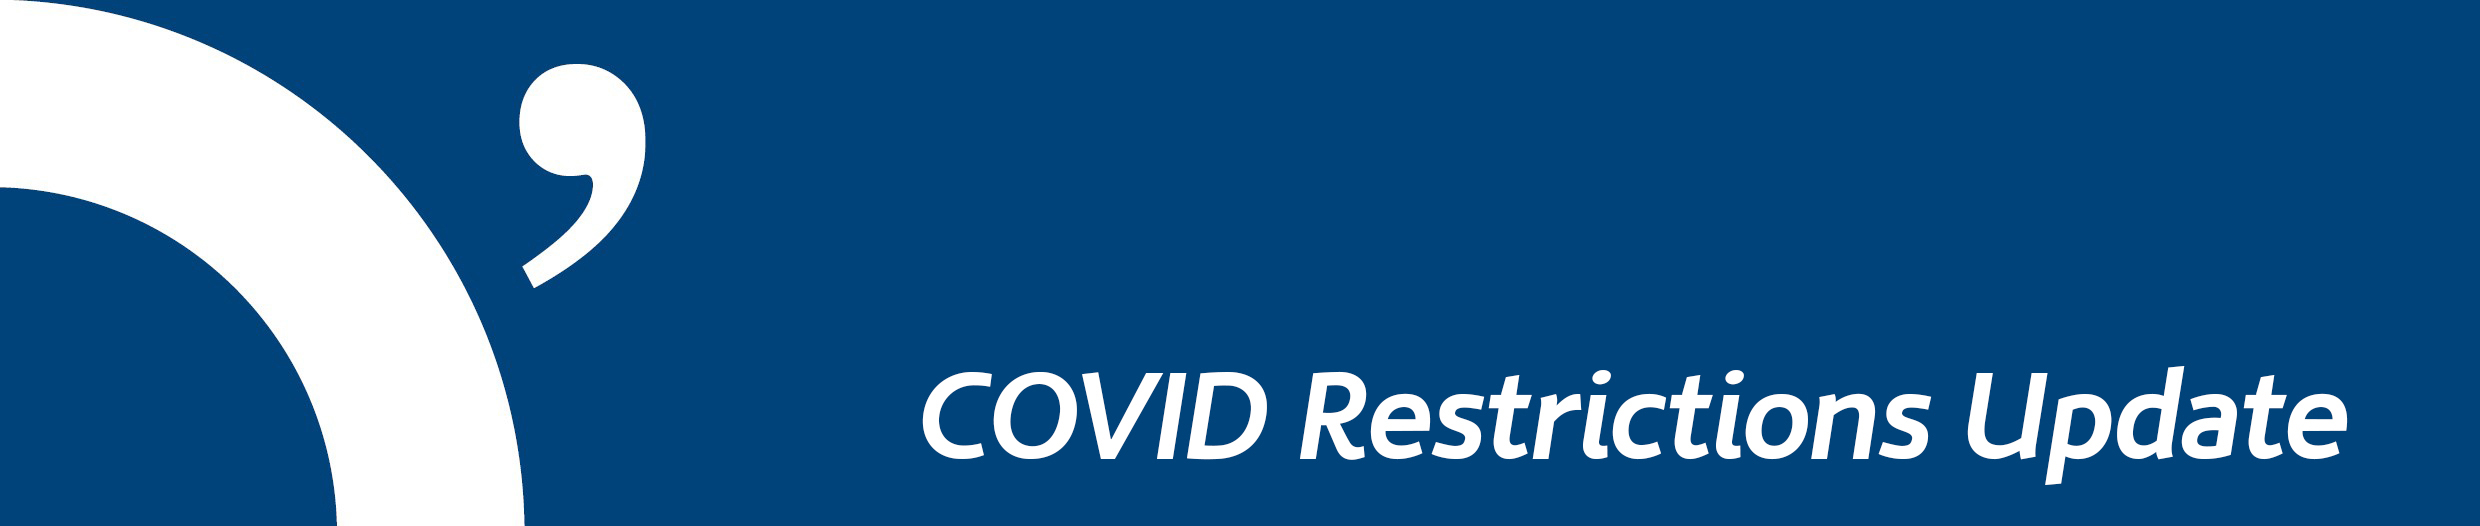 COVID Restrictions Update